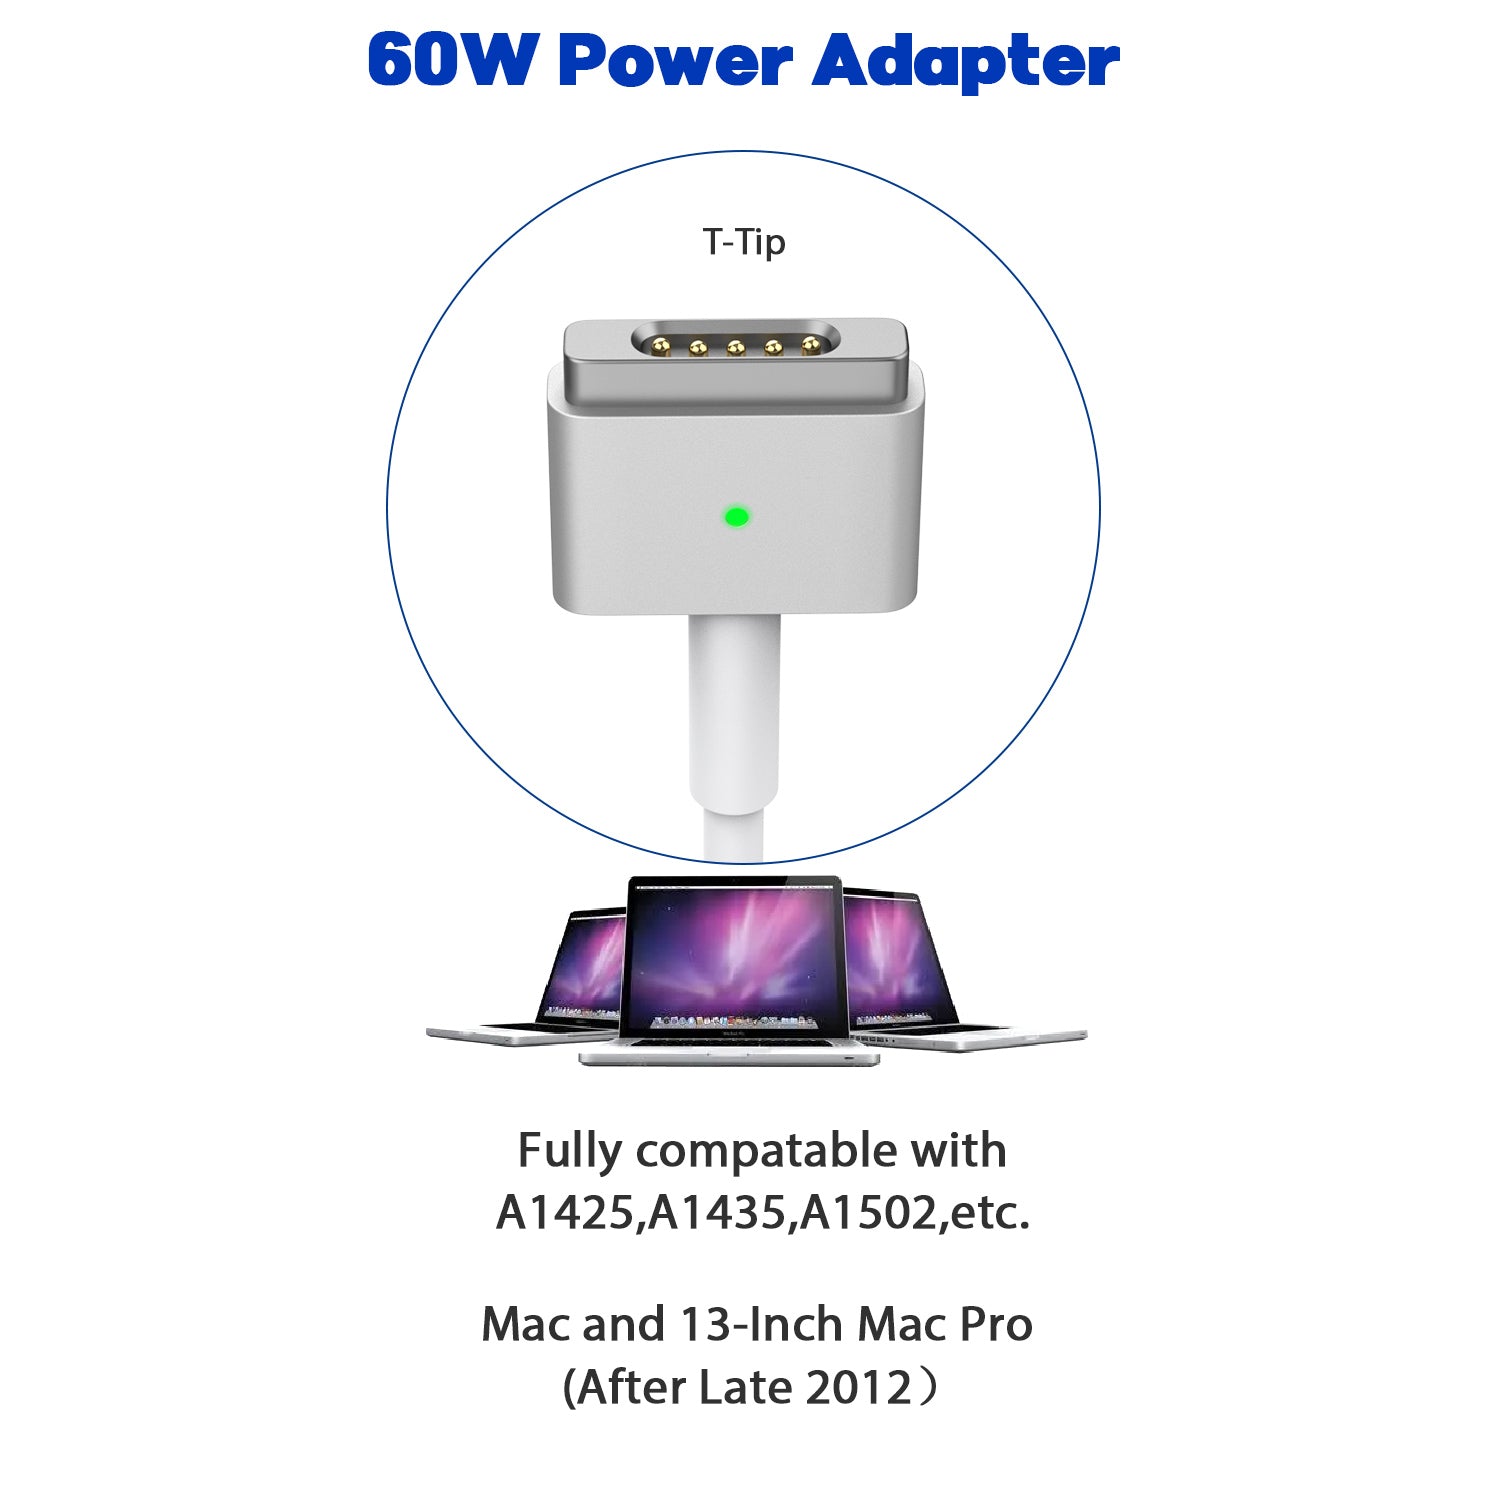 60W Mac Book Pro Charger, T-Tip Connector for Mac Book Charger Apple Laptop Charger Replacement Universal Power Adapter Compatible for 13-inch Mac Book Air & Mac Book Pro 13-inch (After Late 2012)